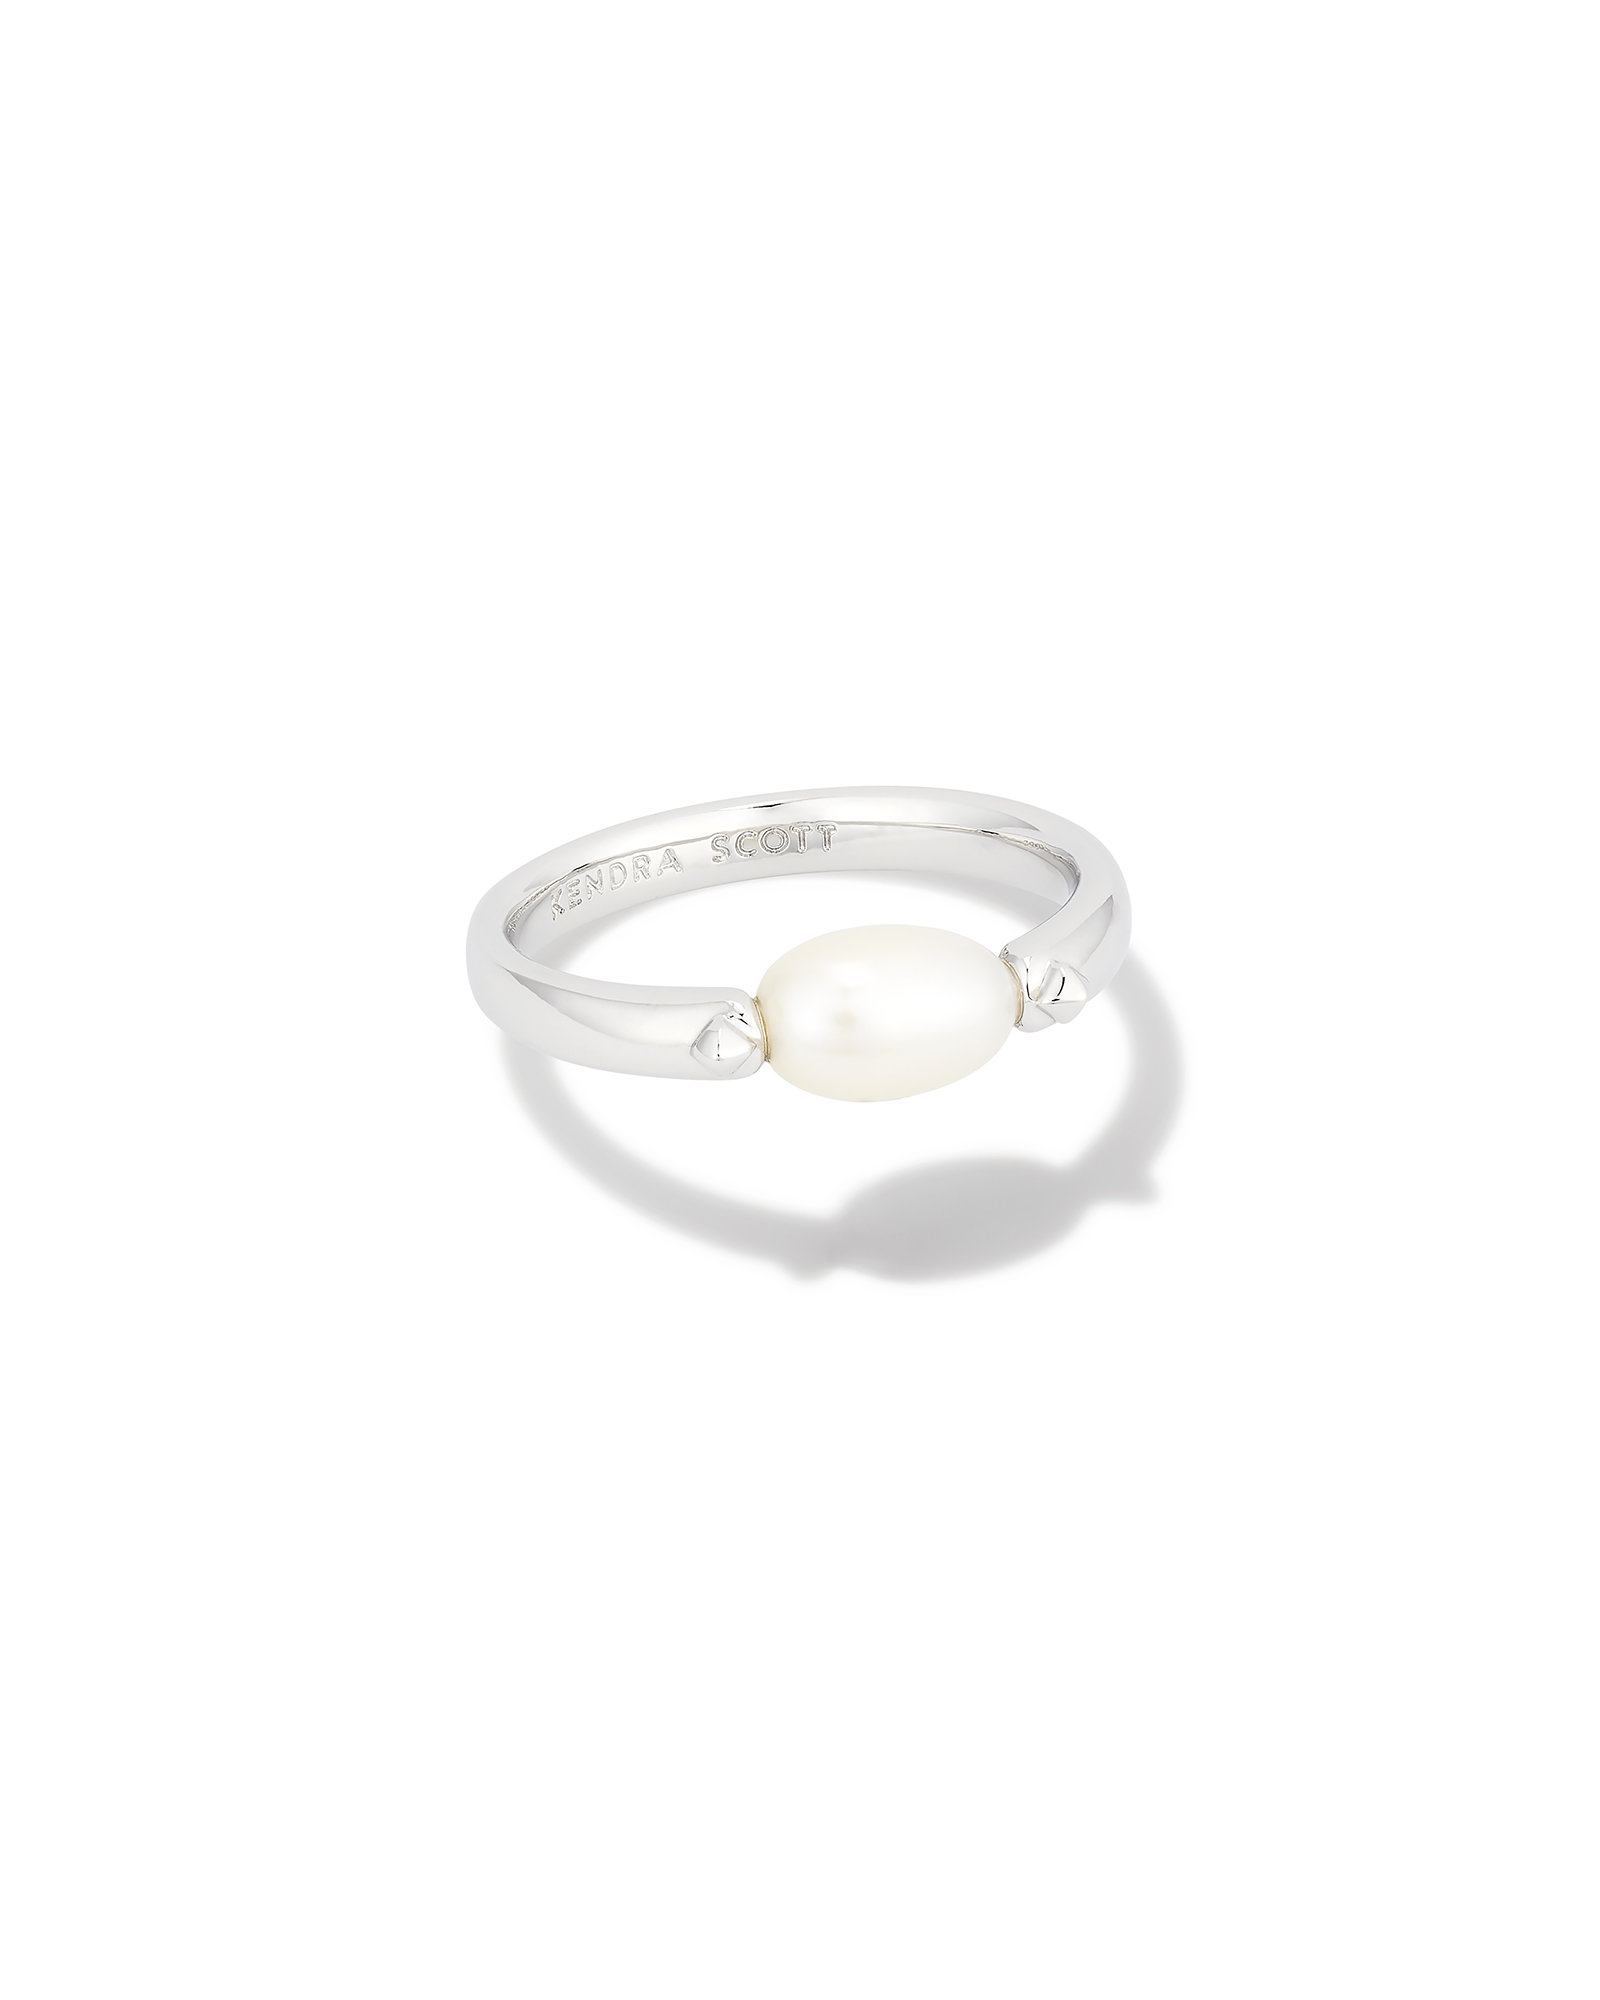 8.0mm Round Freshwater White Pearl Ring in Sterling Silver - Walmart.com